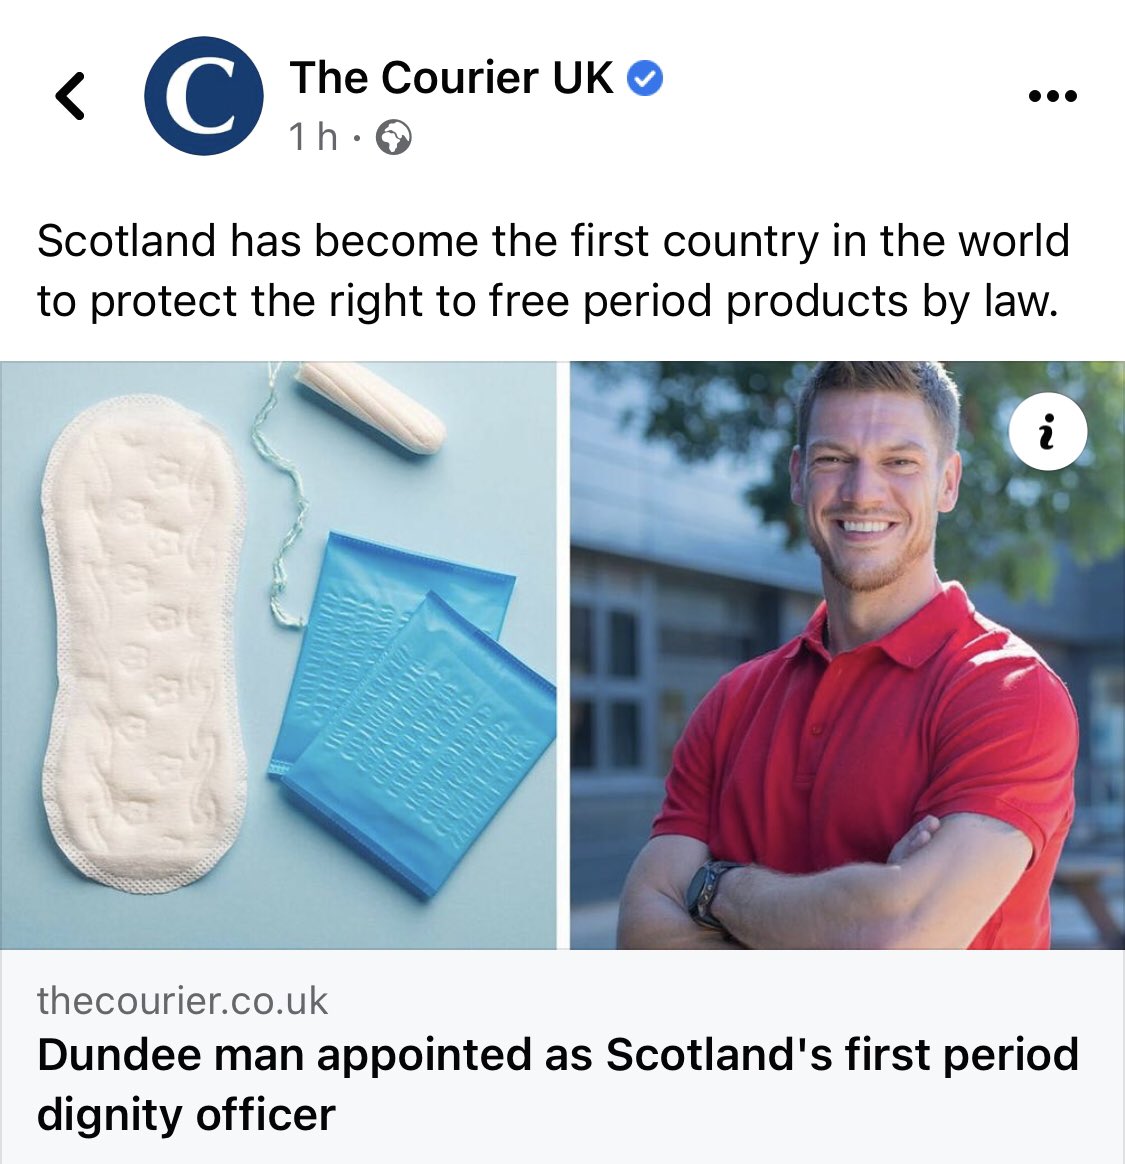 The Scottish government have appointed a man as the period dignity officer… where do I start with this…. A man shall be mansplaining periods 🤦🏻‍♀️